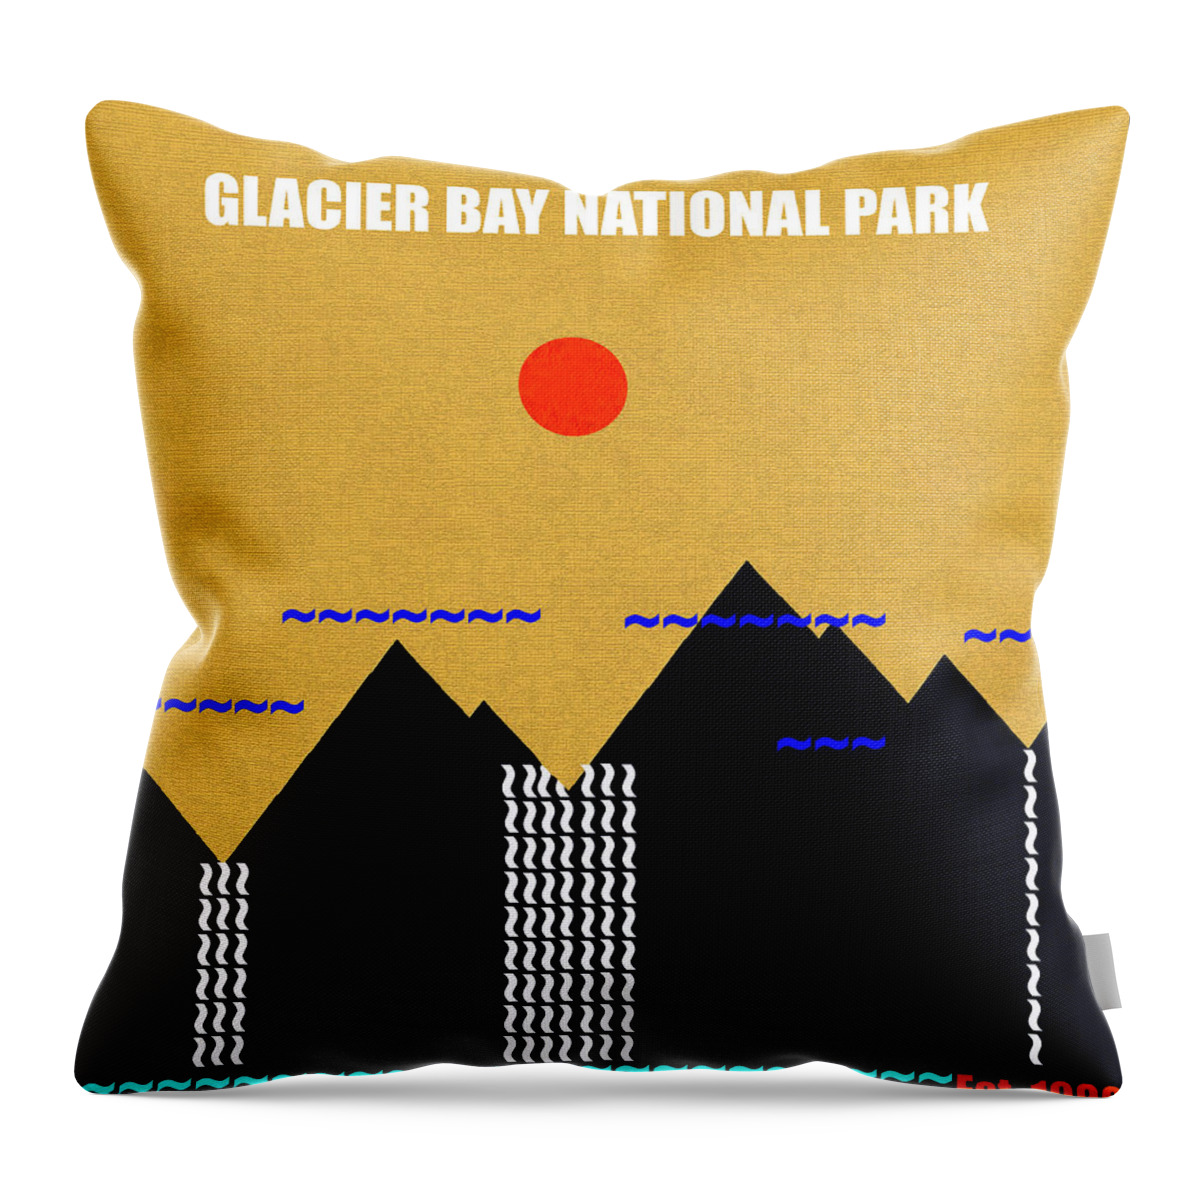 Glacier Bay National Park Alaska Throw Pillow featuring the photograph Glacier Bay N. P. M series by David Lee Thompson